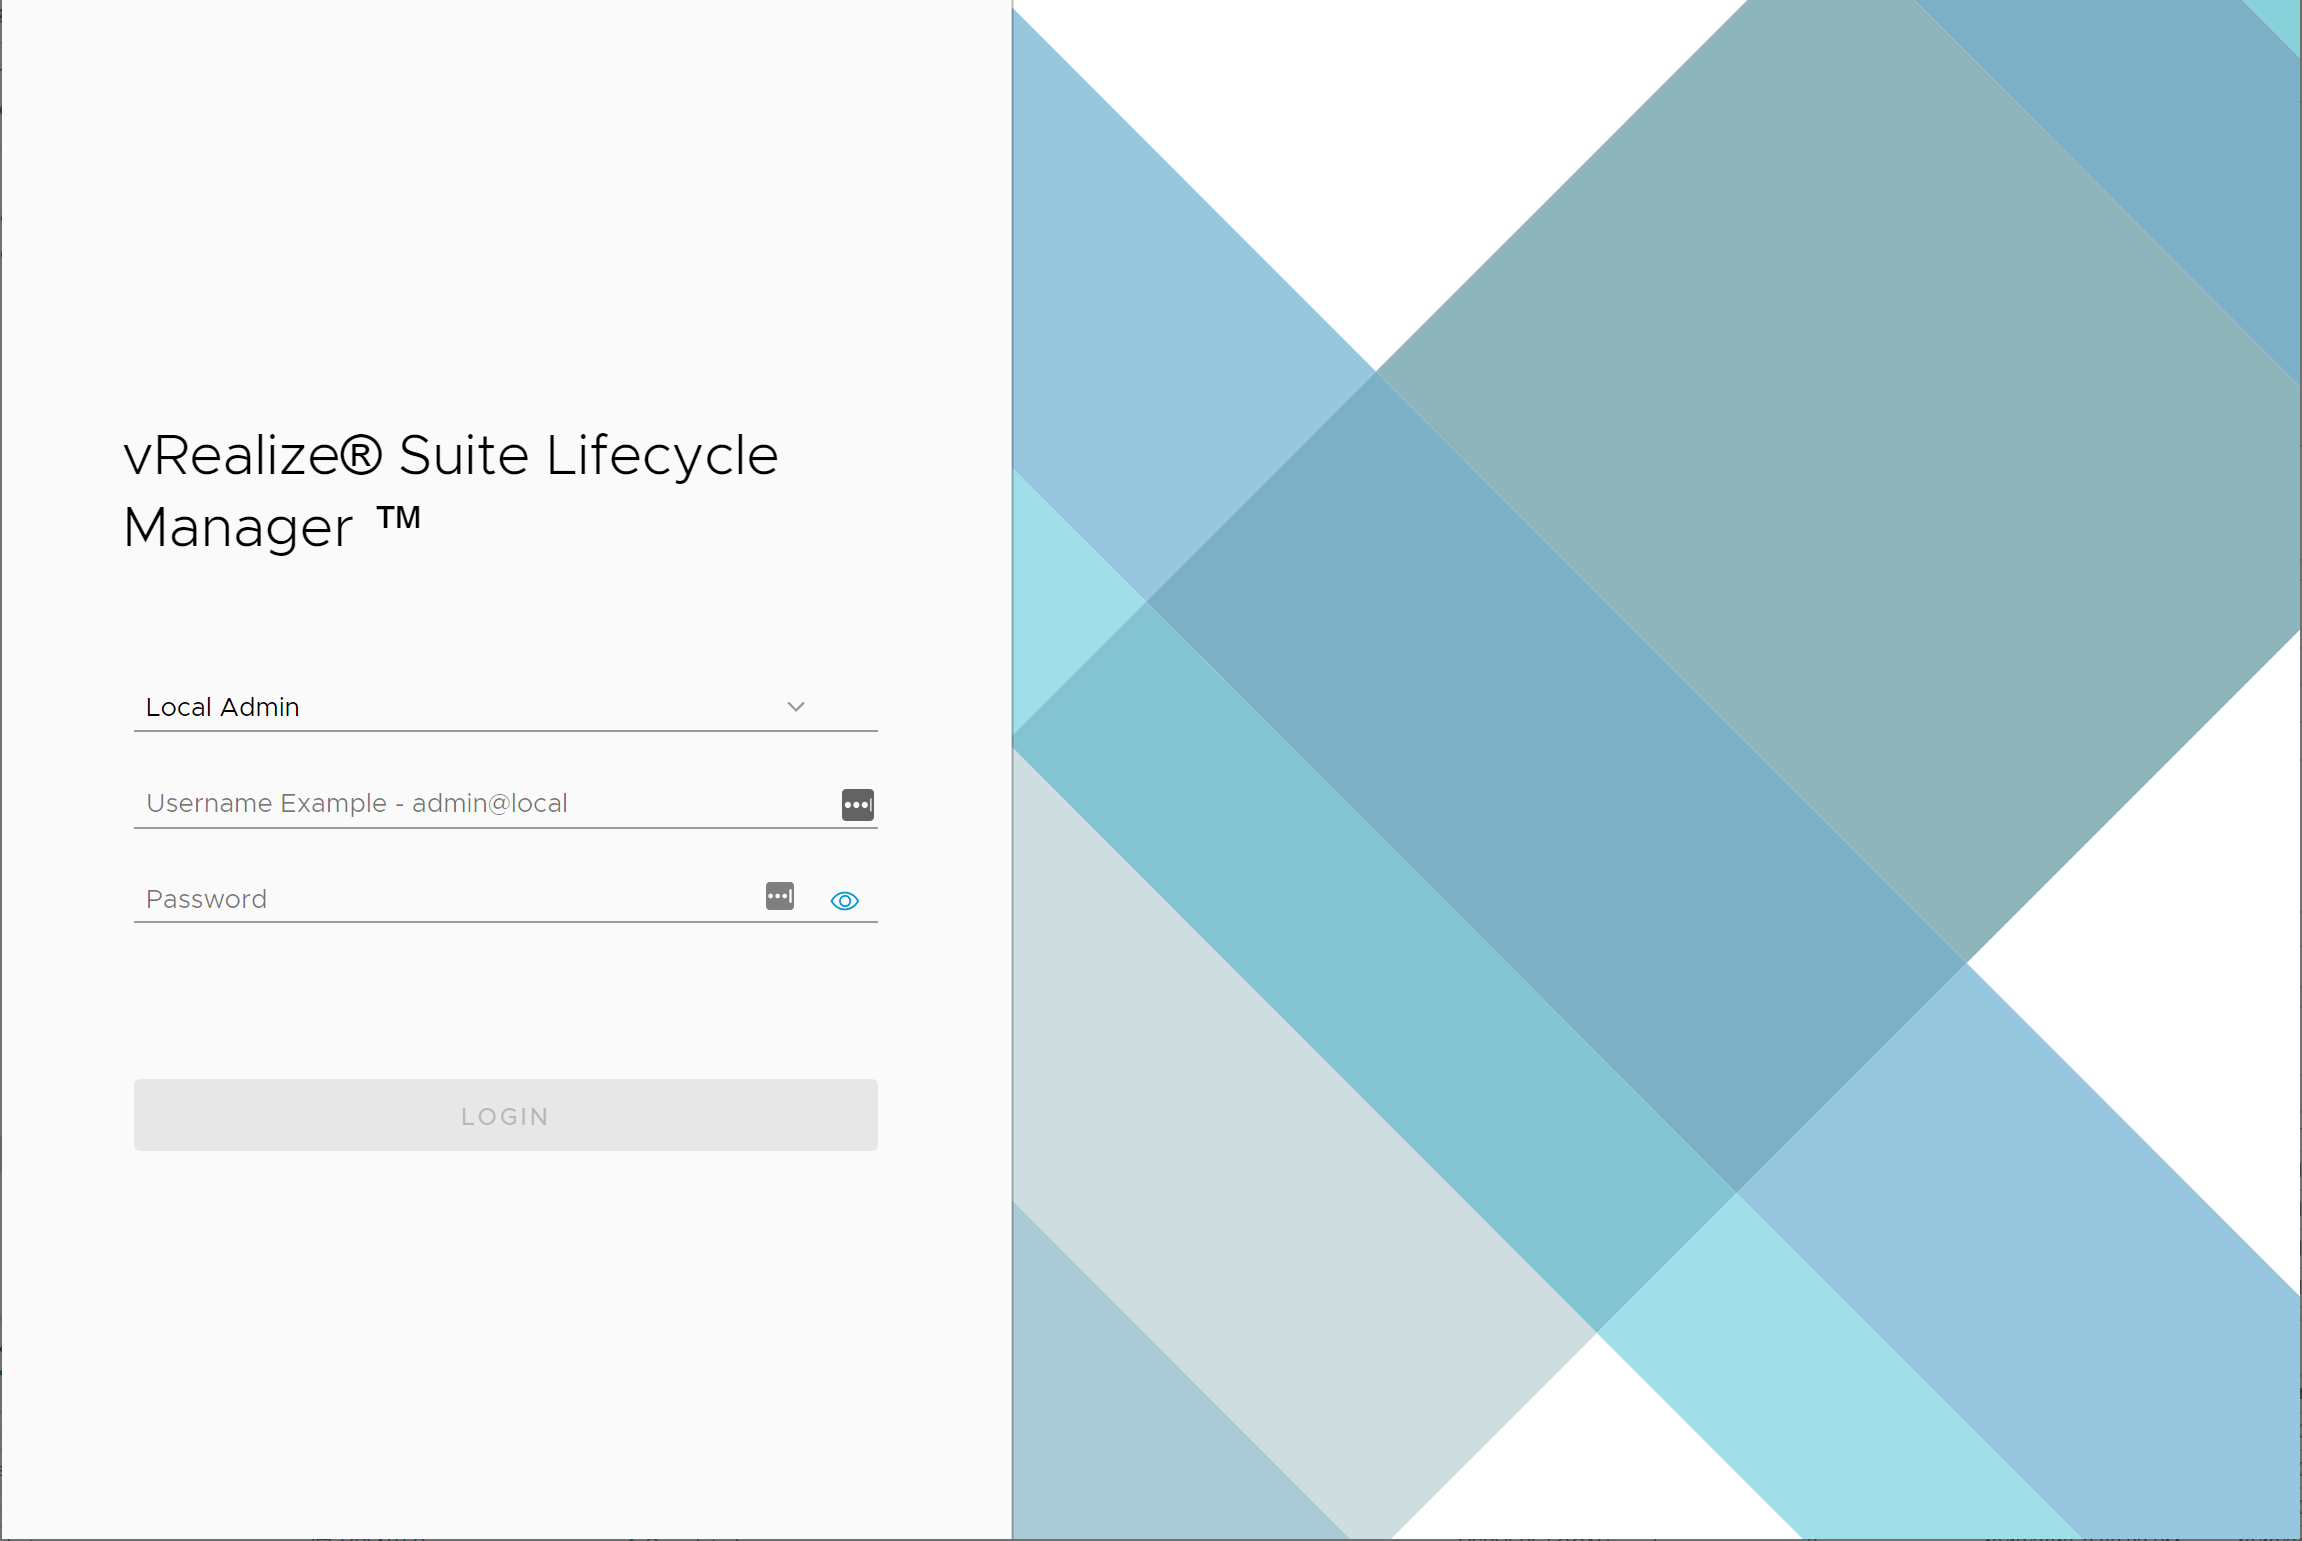 vRealize Suite Lifecycle Manager - Logon Screen